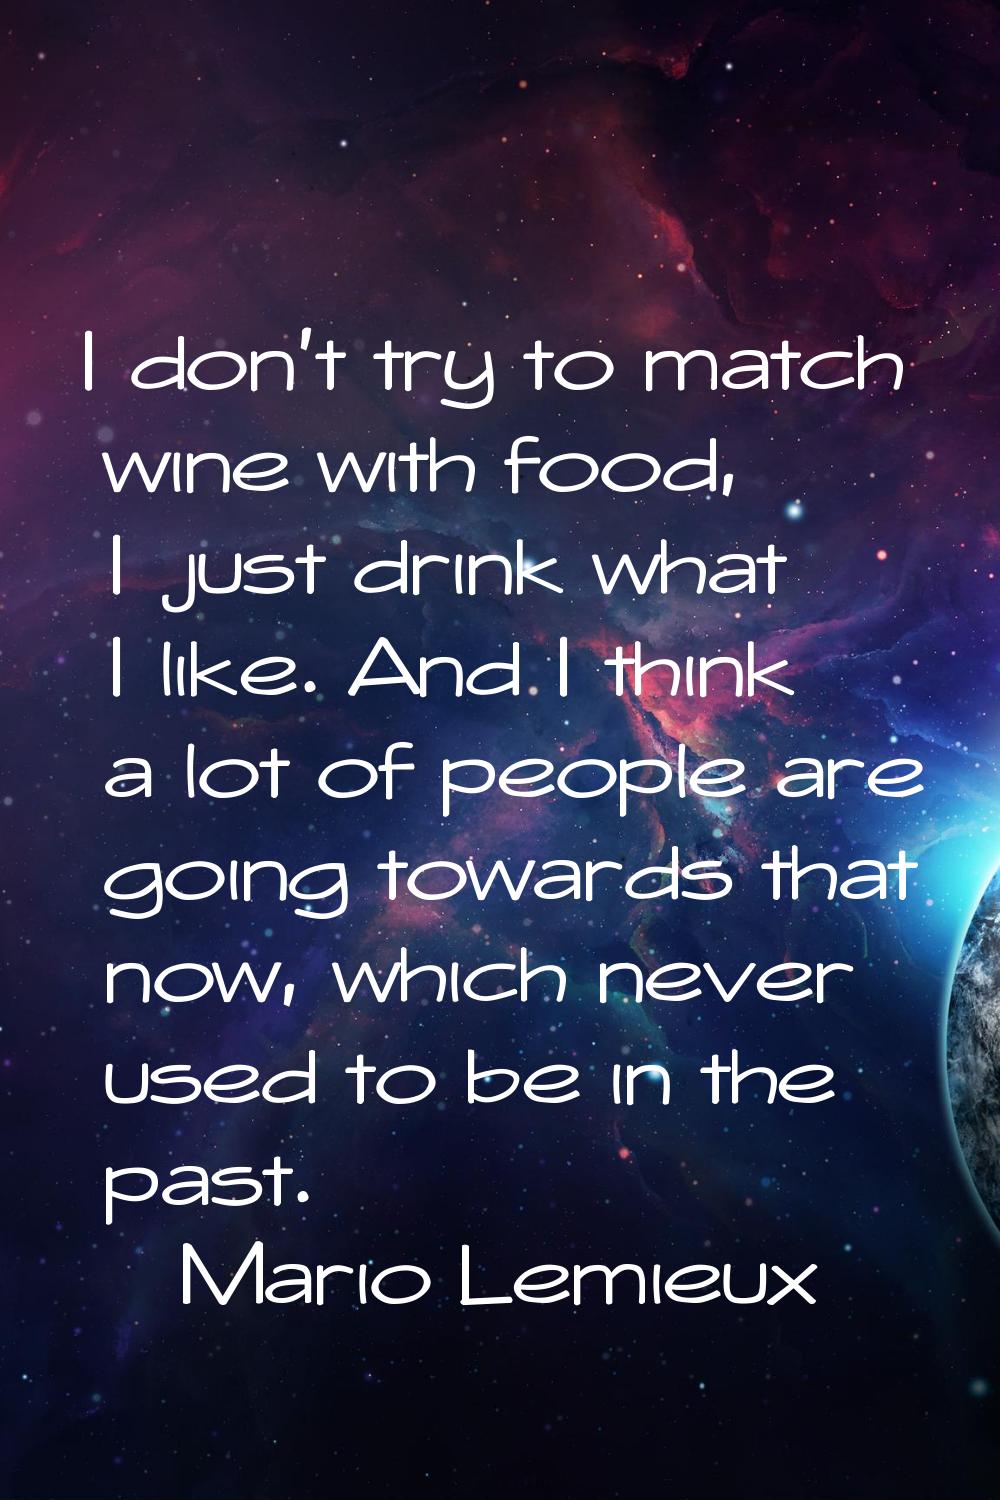 I don't try to match wine with food, I just drink what I like. And I think a lot of people are goin